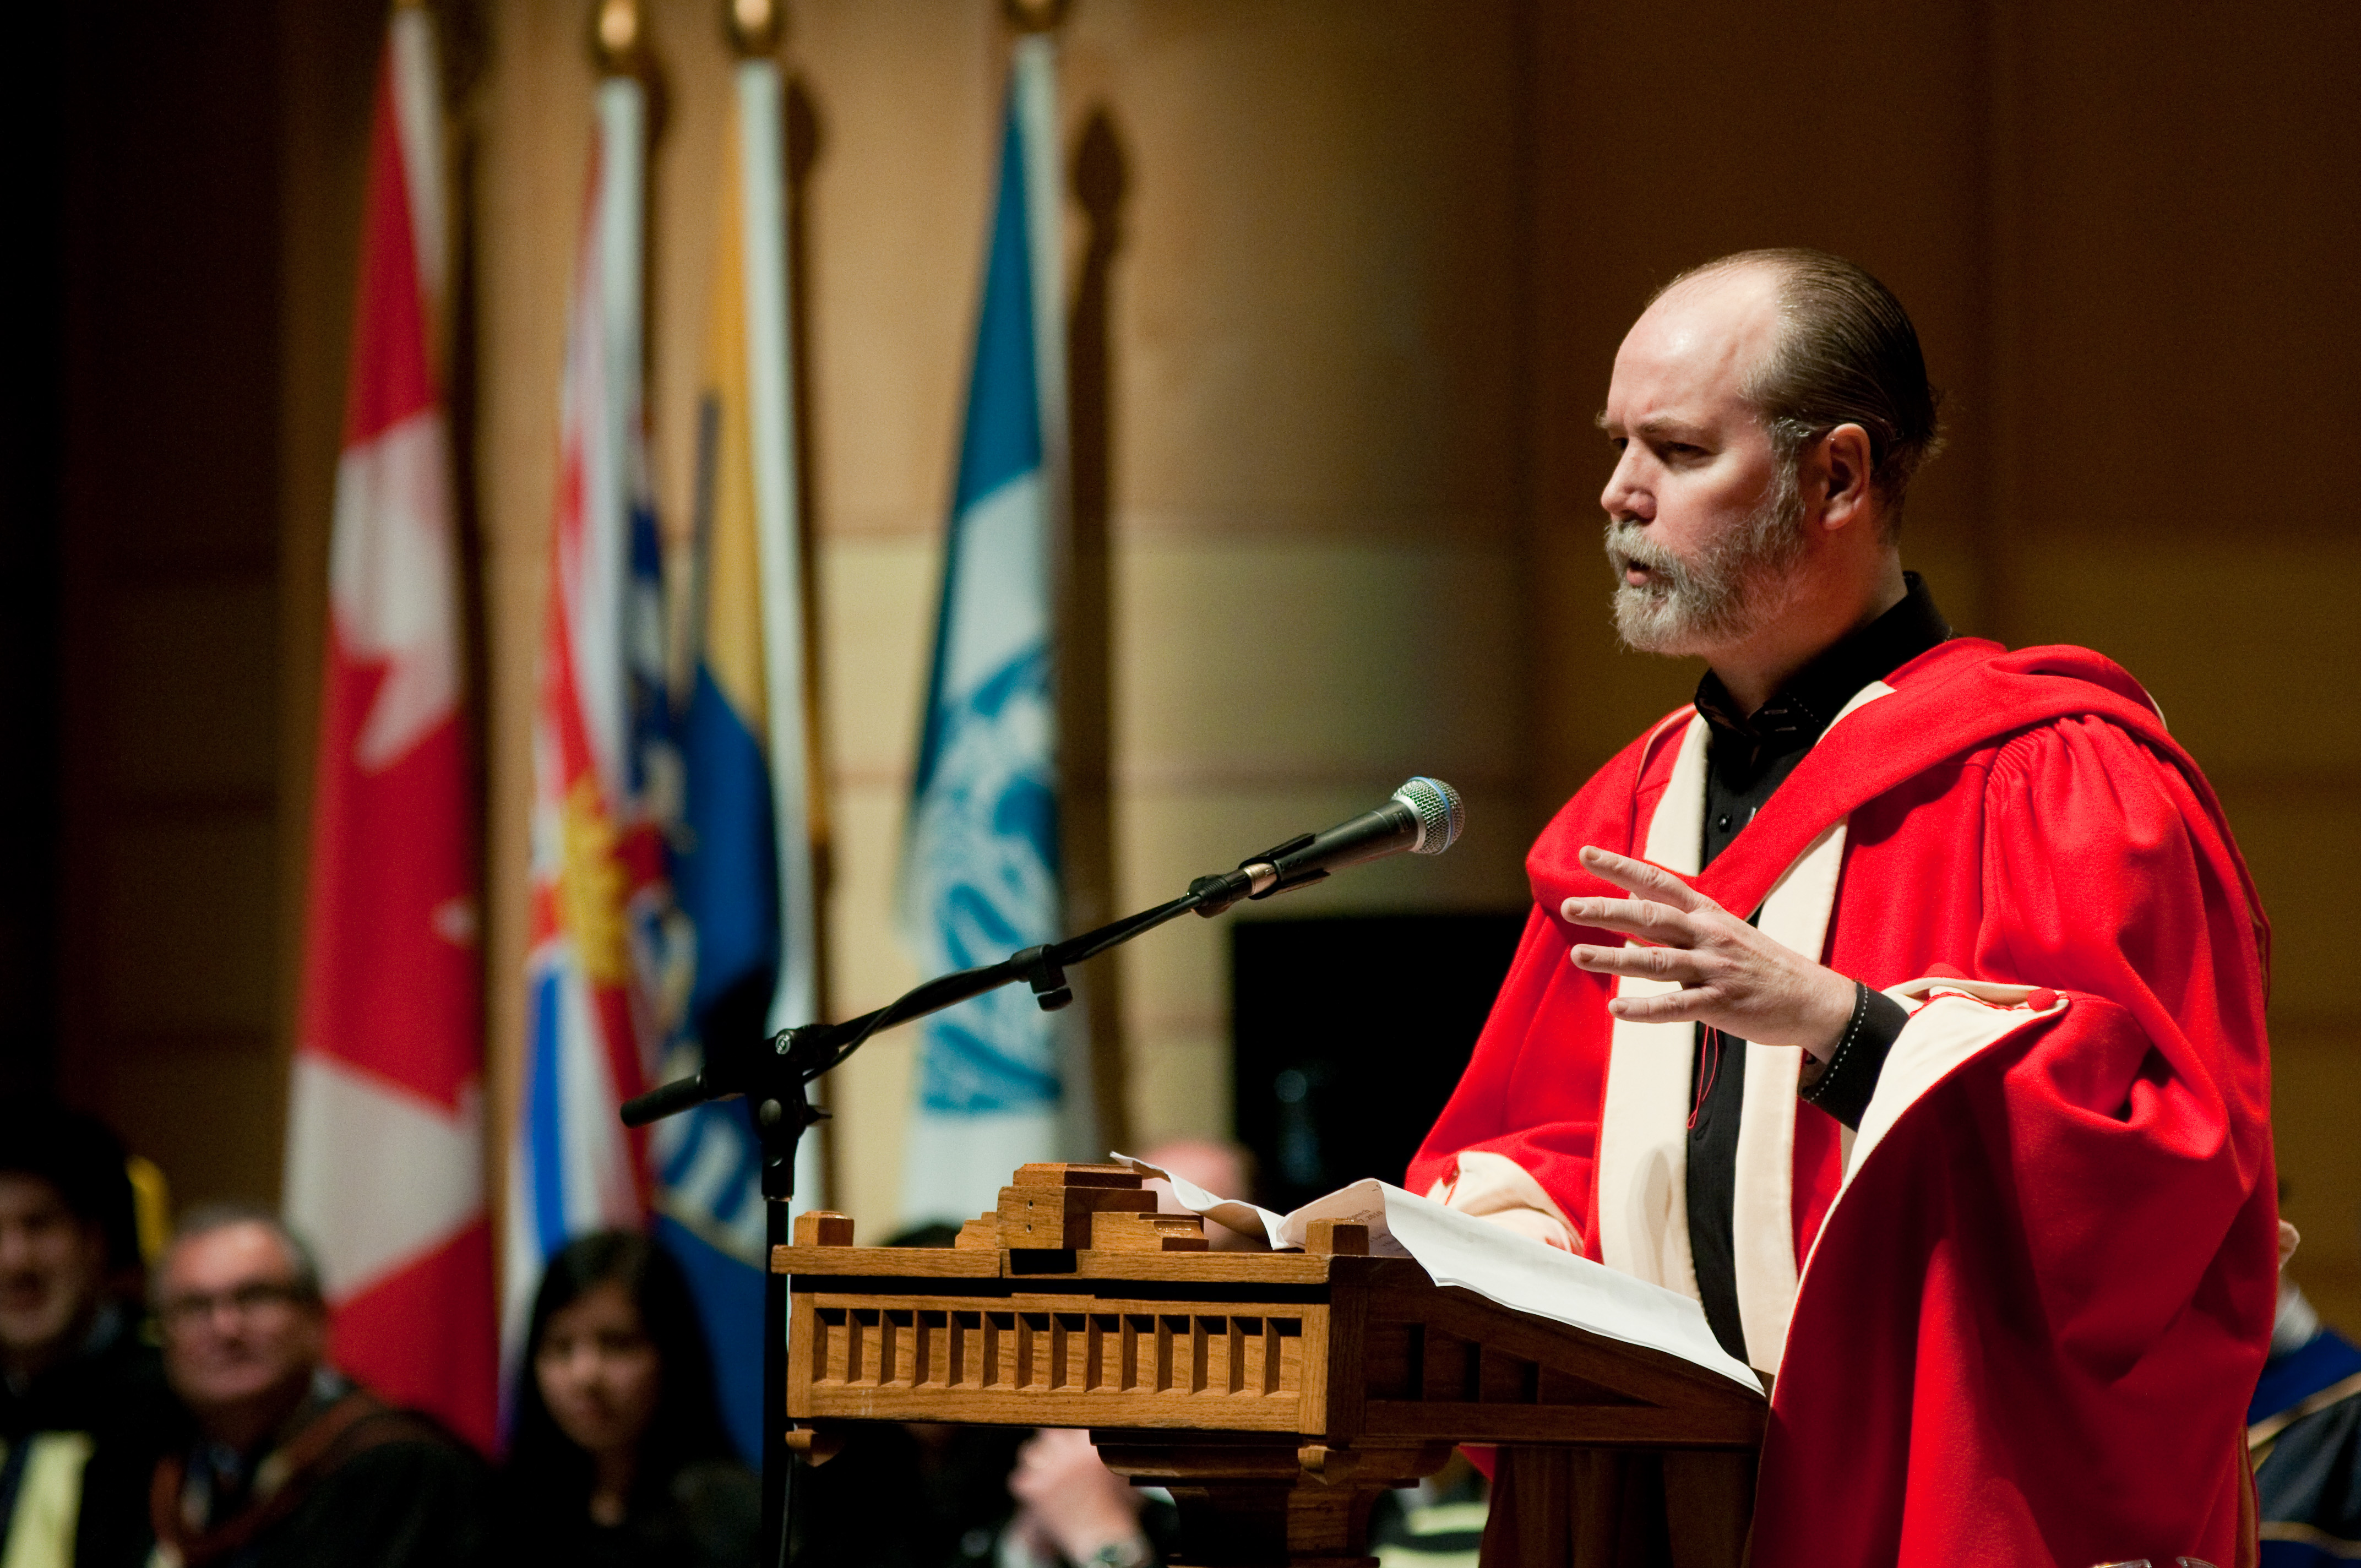 Douglas Coupland speaking at a podium at his honorary degree ceremony.